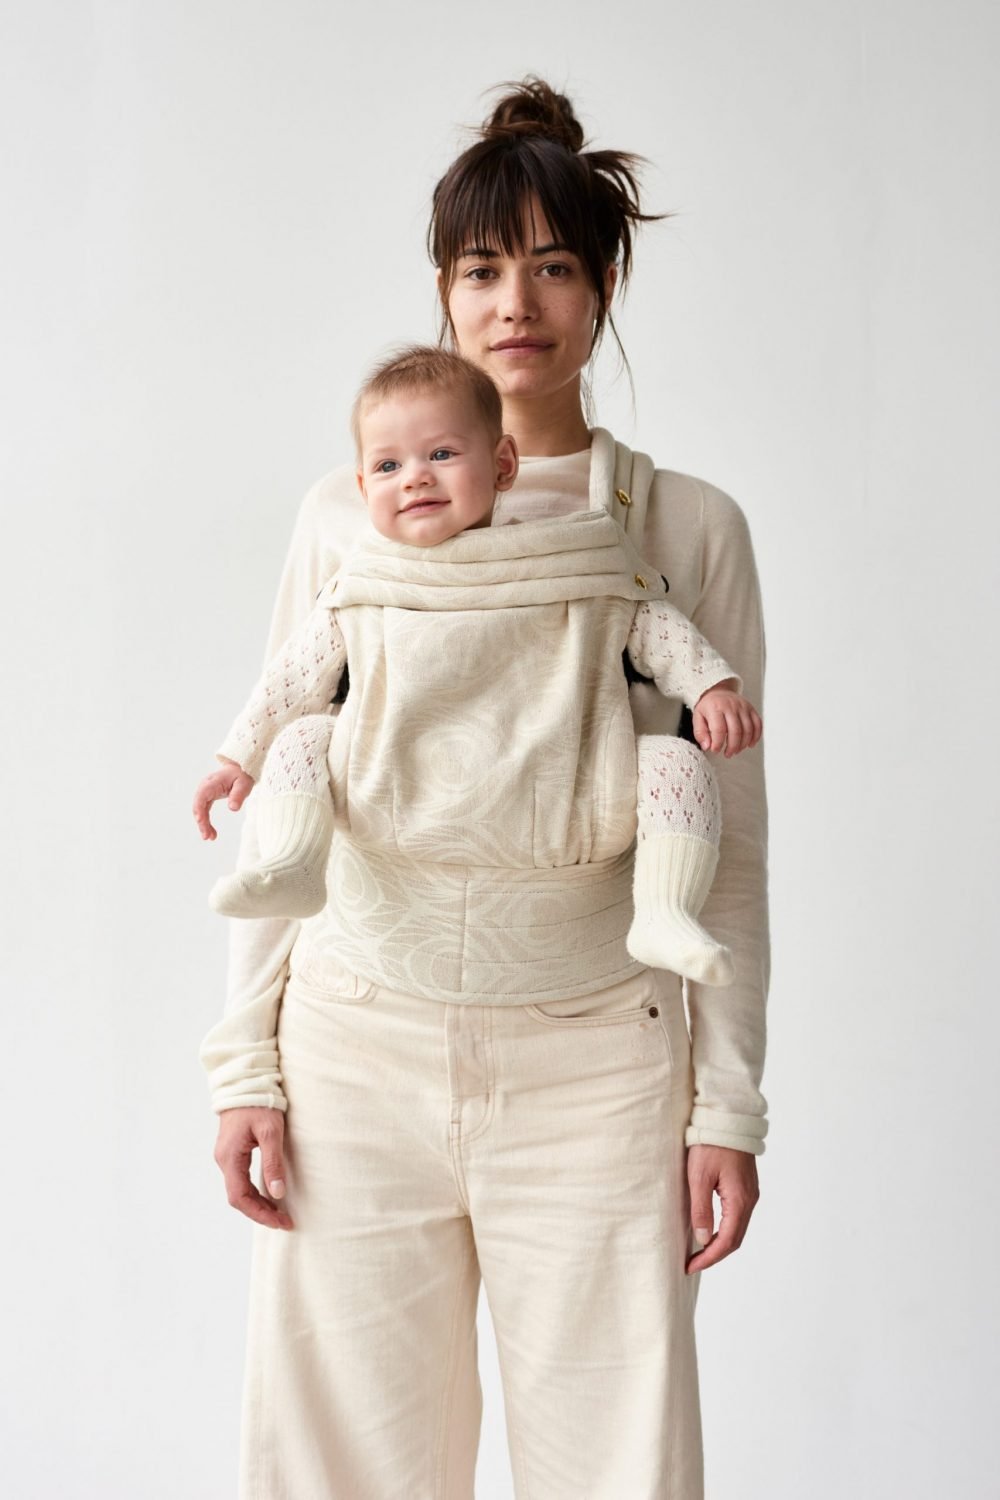 Front Carry Facing Out | Image Instructions | ARTIPOPPE